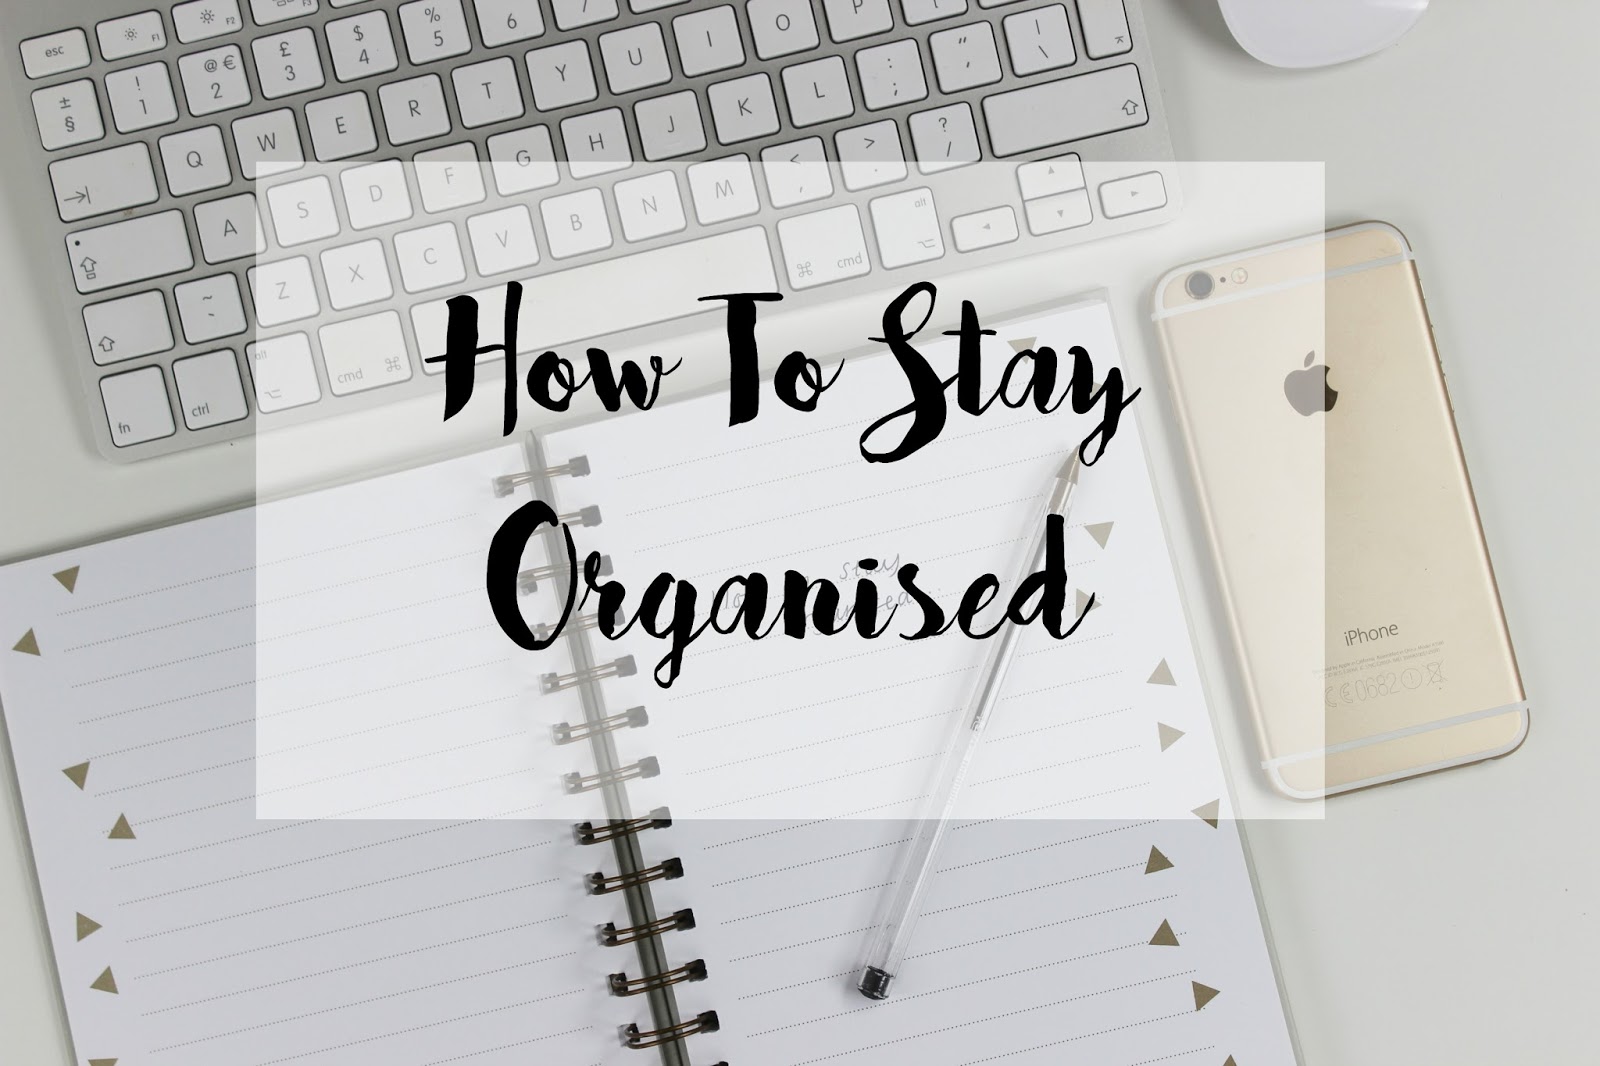 Emily Rose: How to stay organised | Top tips